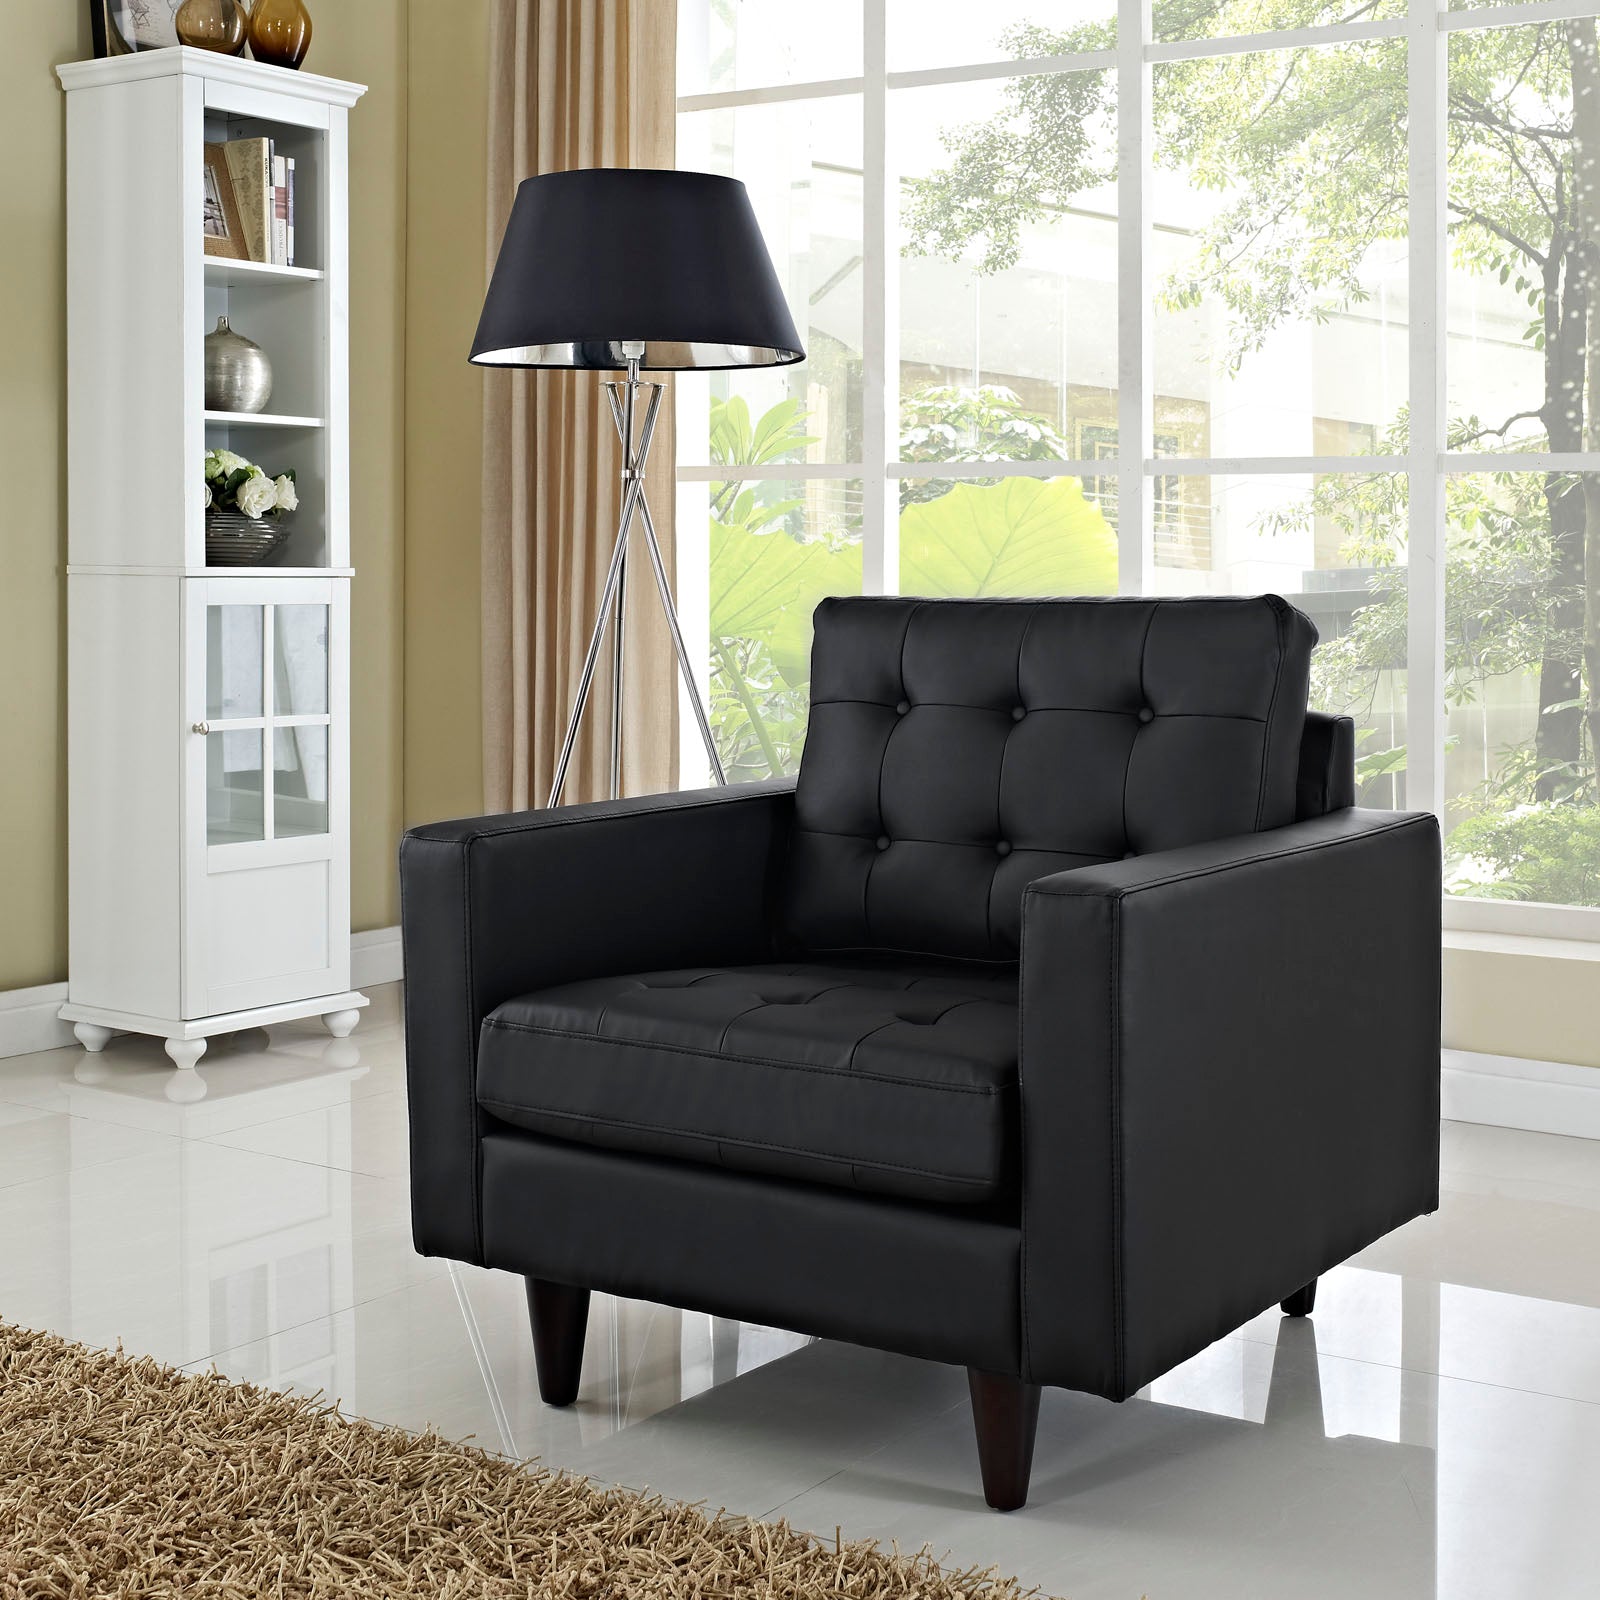 Empress Bonded Leather Armchair - East Shore Modern Home Furnishings